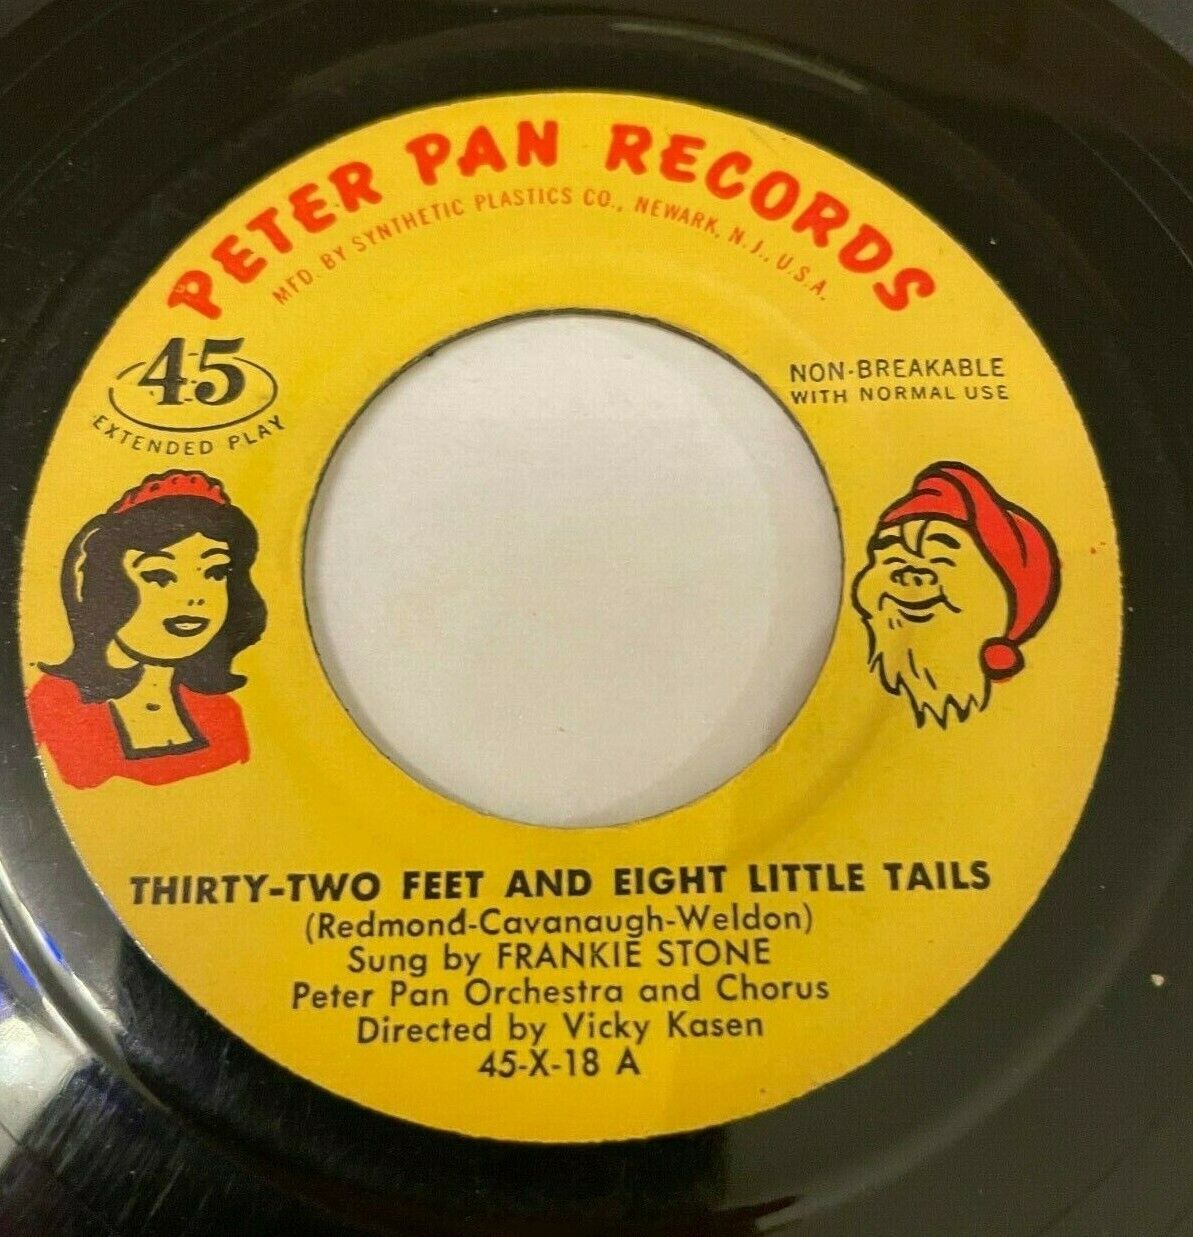 Frankie Stone Thirty-Two Feet And Eight Little Tails Vinyl Record Vintage 45 RPM